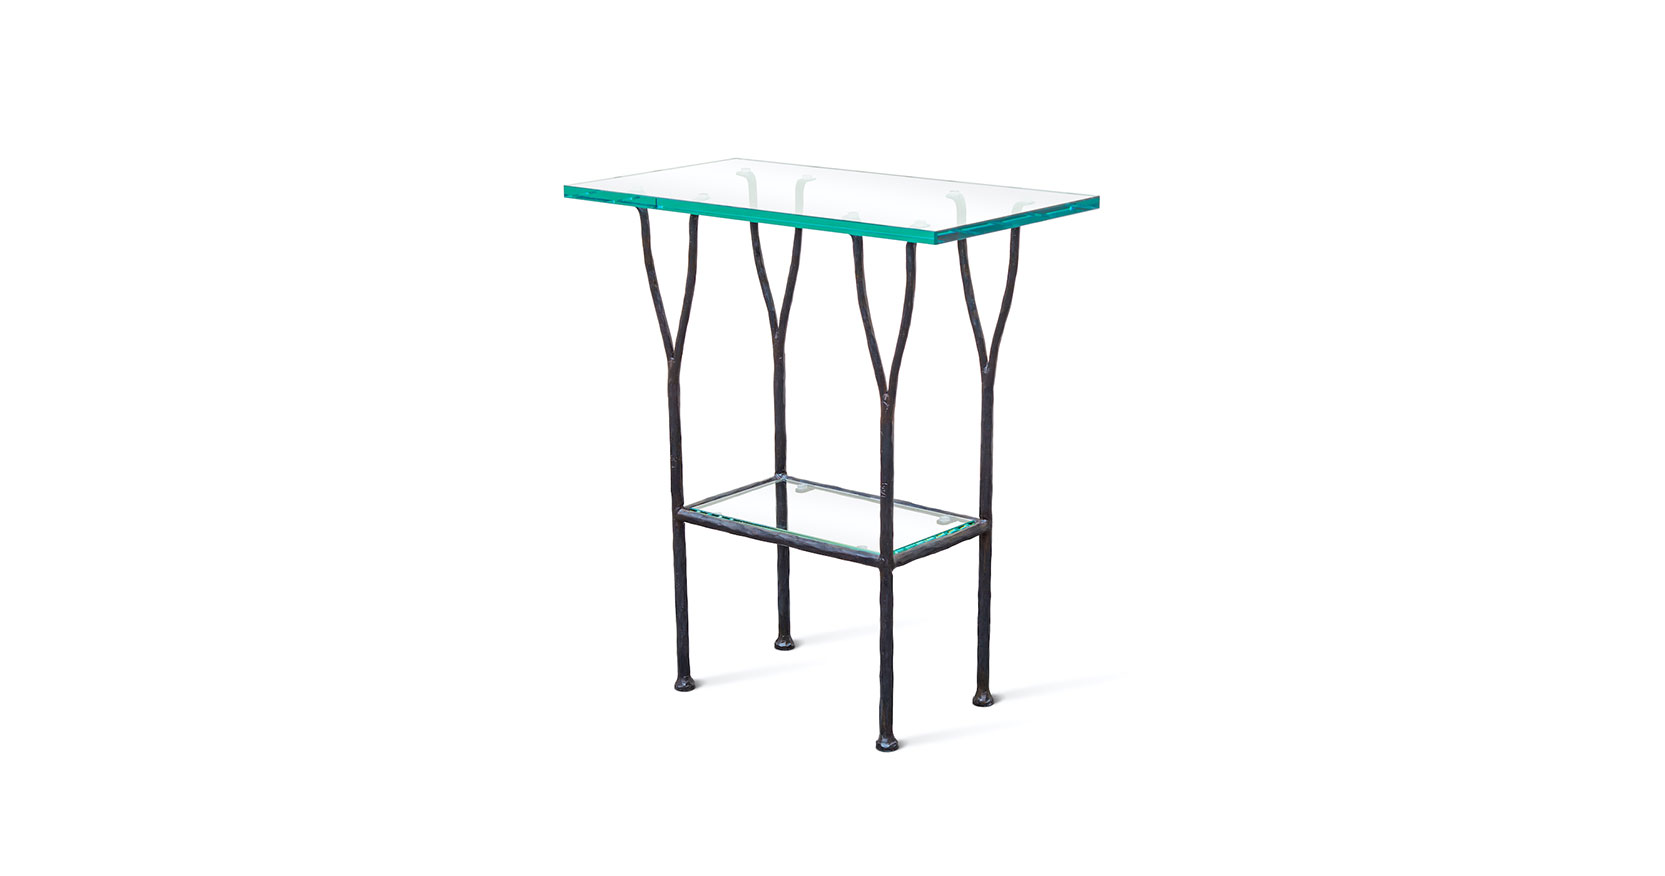 Garouste Bonetti, small rectangular minimalist table, with two glass tops, black wrought iron legs that end in 2 forks